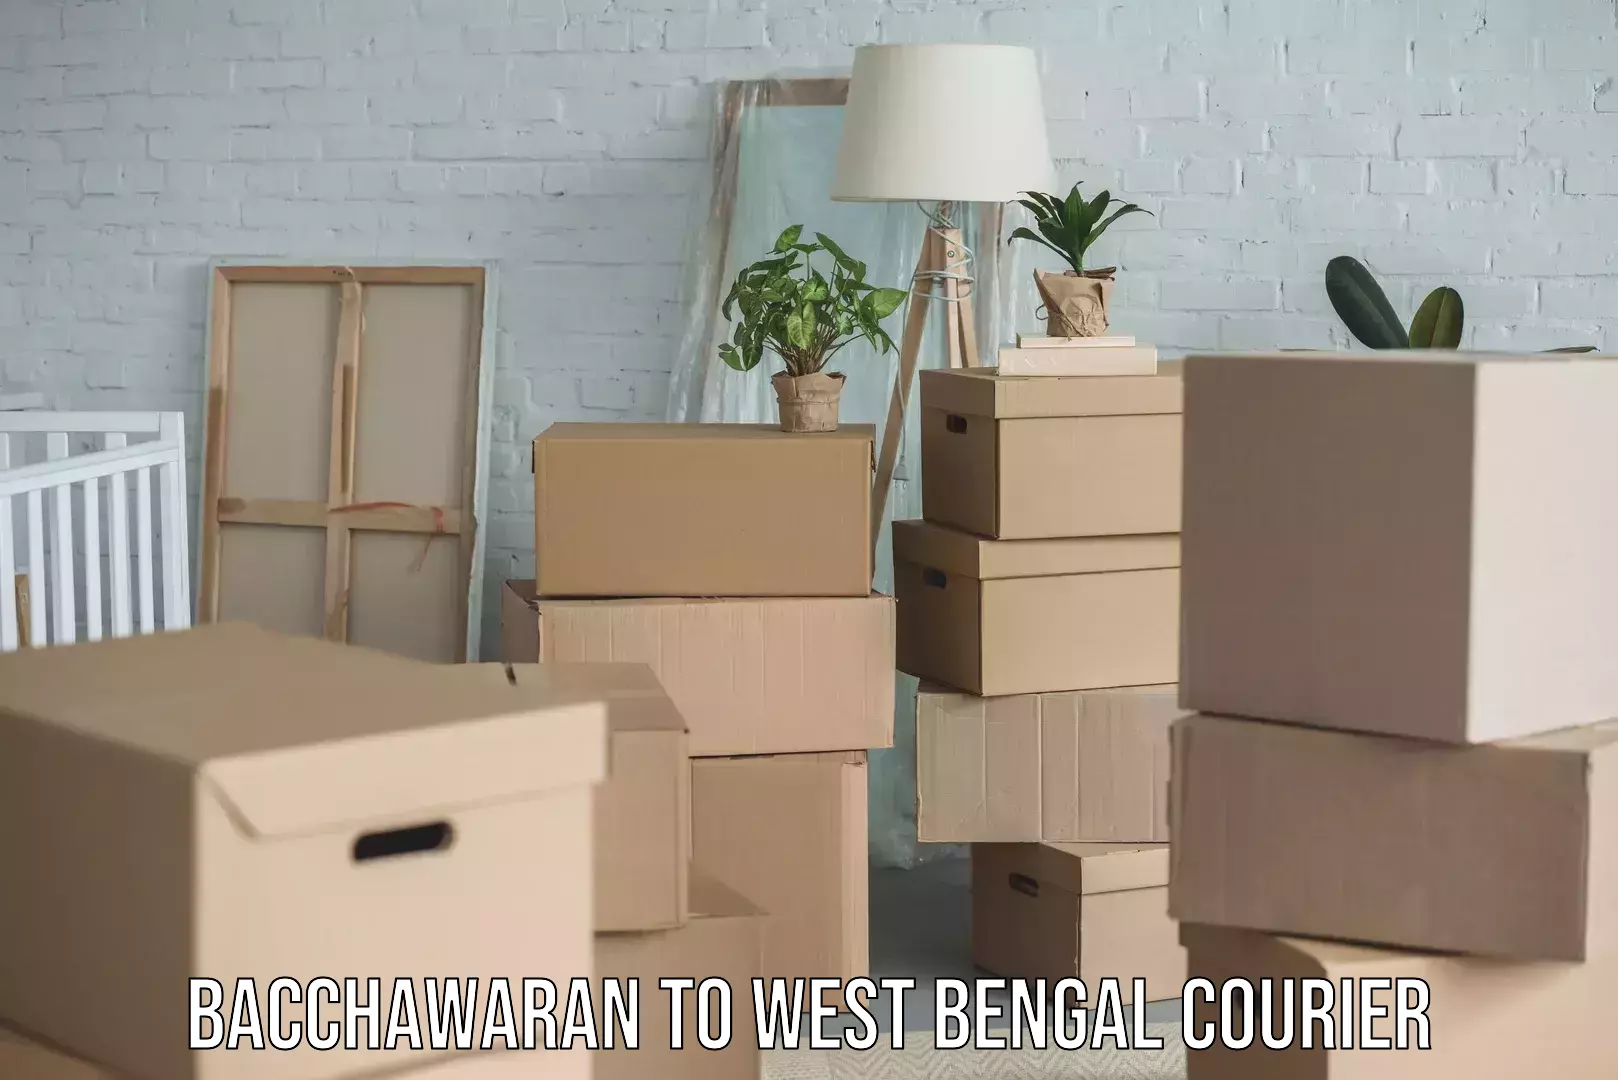 Global shipping networks Bacchawaran to West Bengal